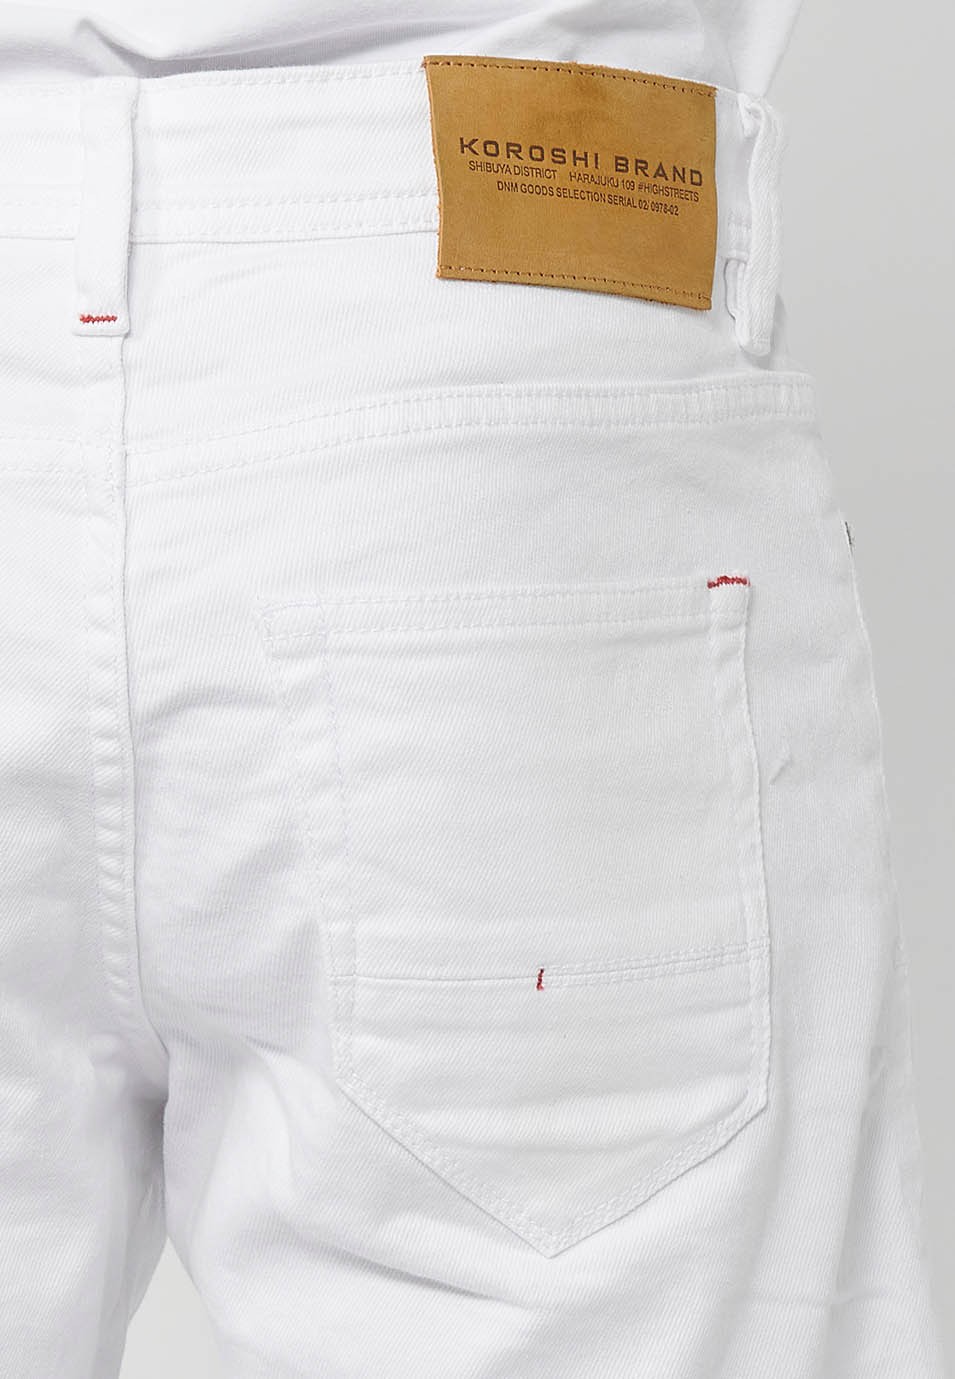 Denim Bermuda shorts with turn-up finish and front closure with zipper and button in White for Men 7